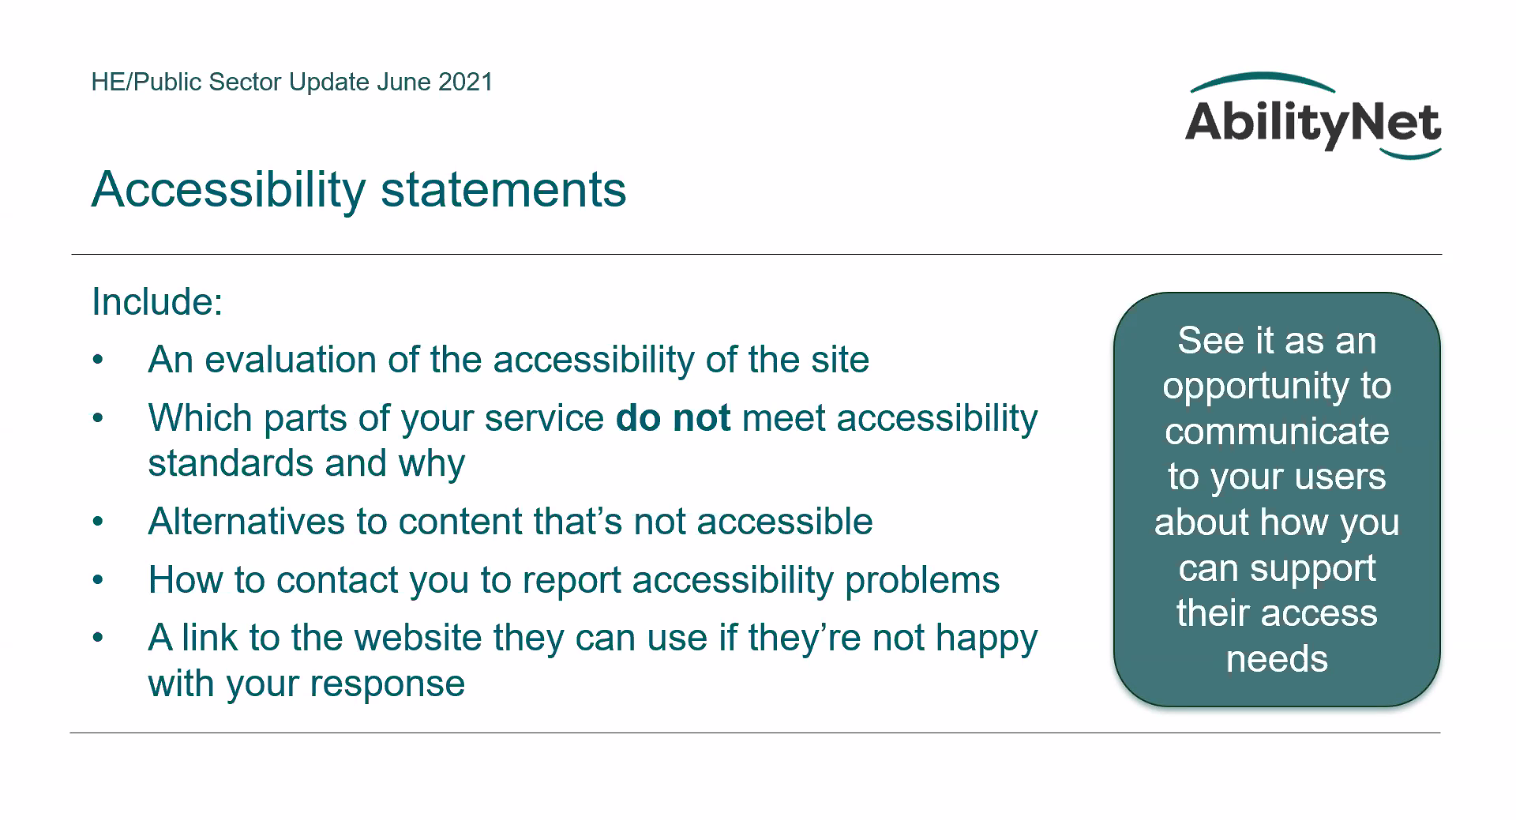 Check Accessibility statements